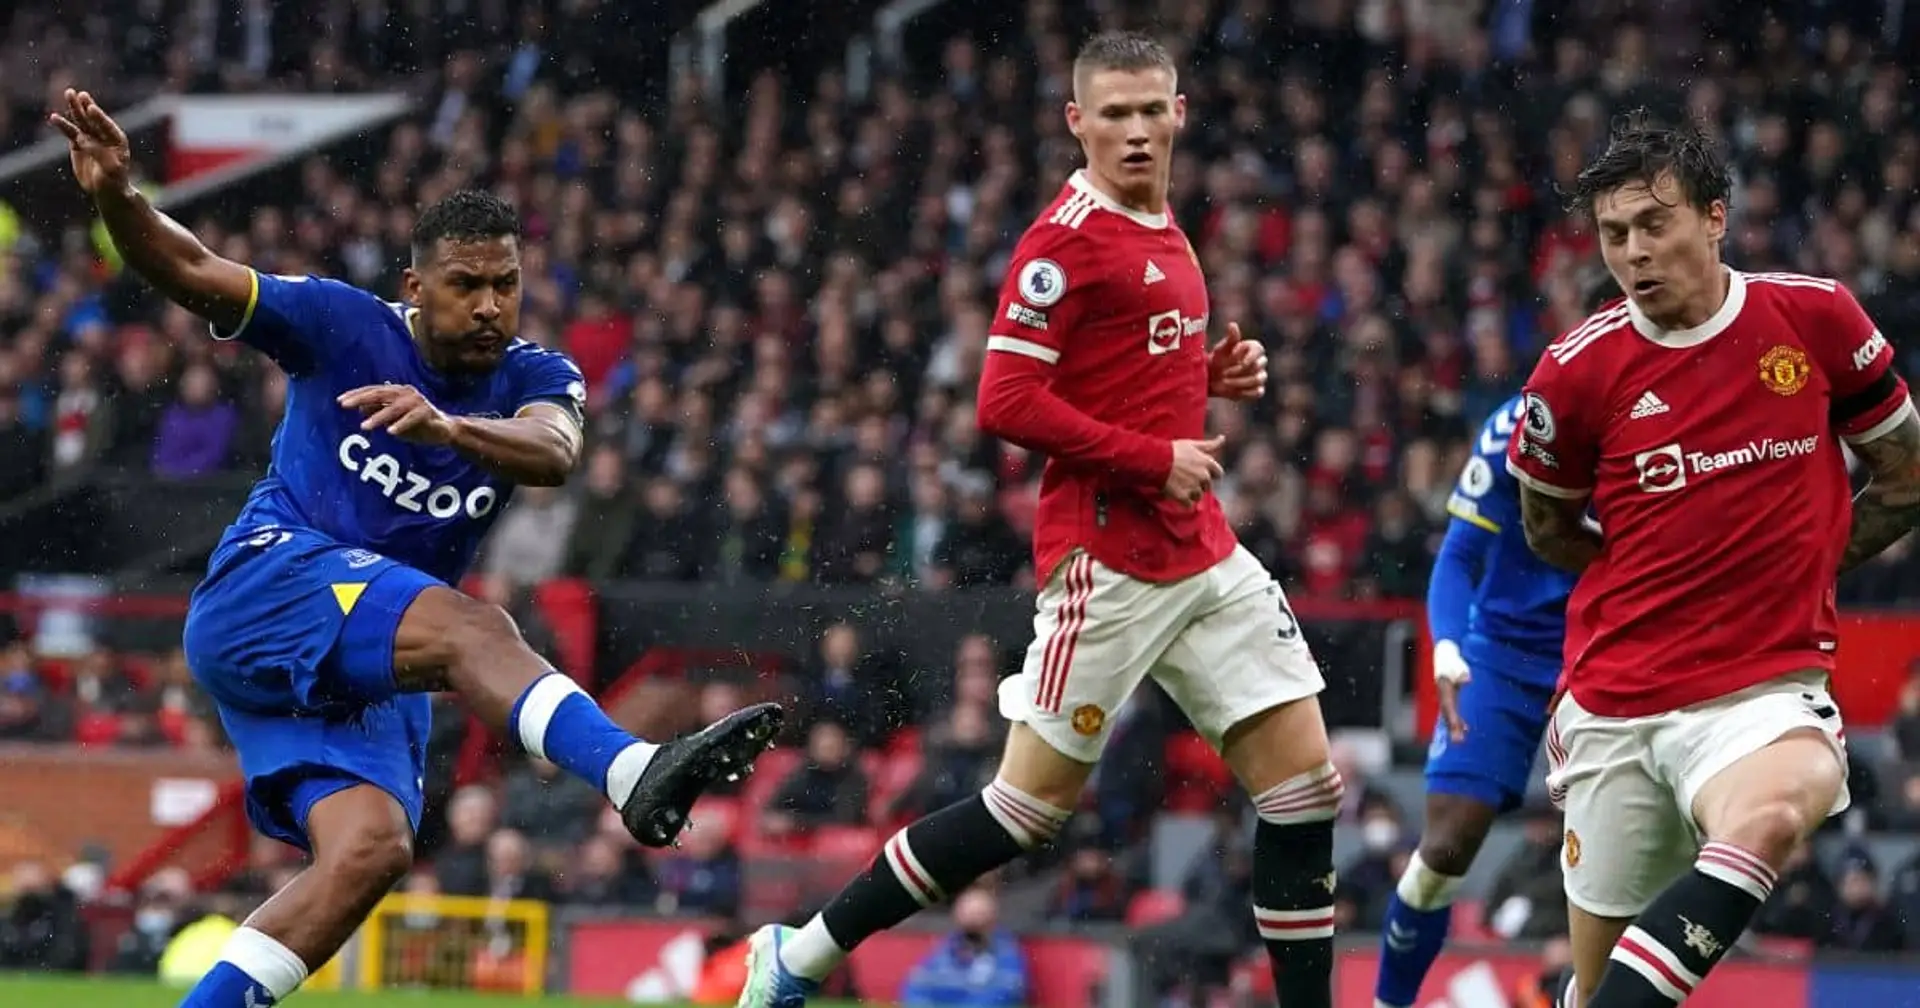 Man United's Old Trafford woes continue with another goal conceded against Everton